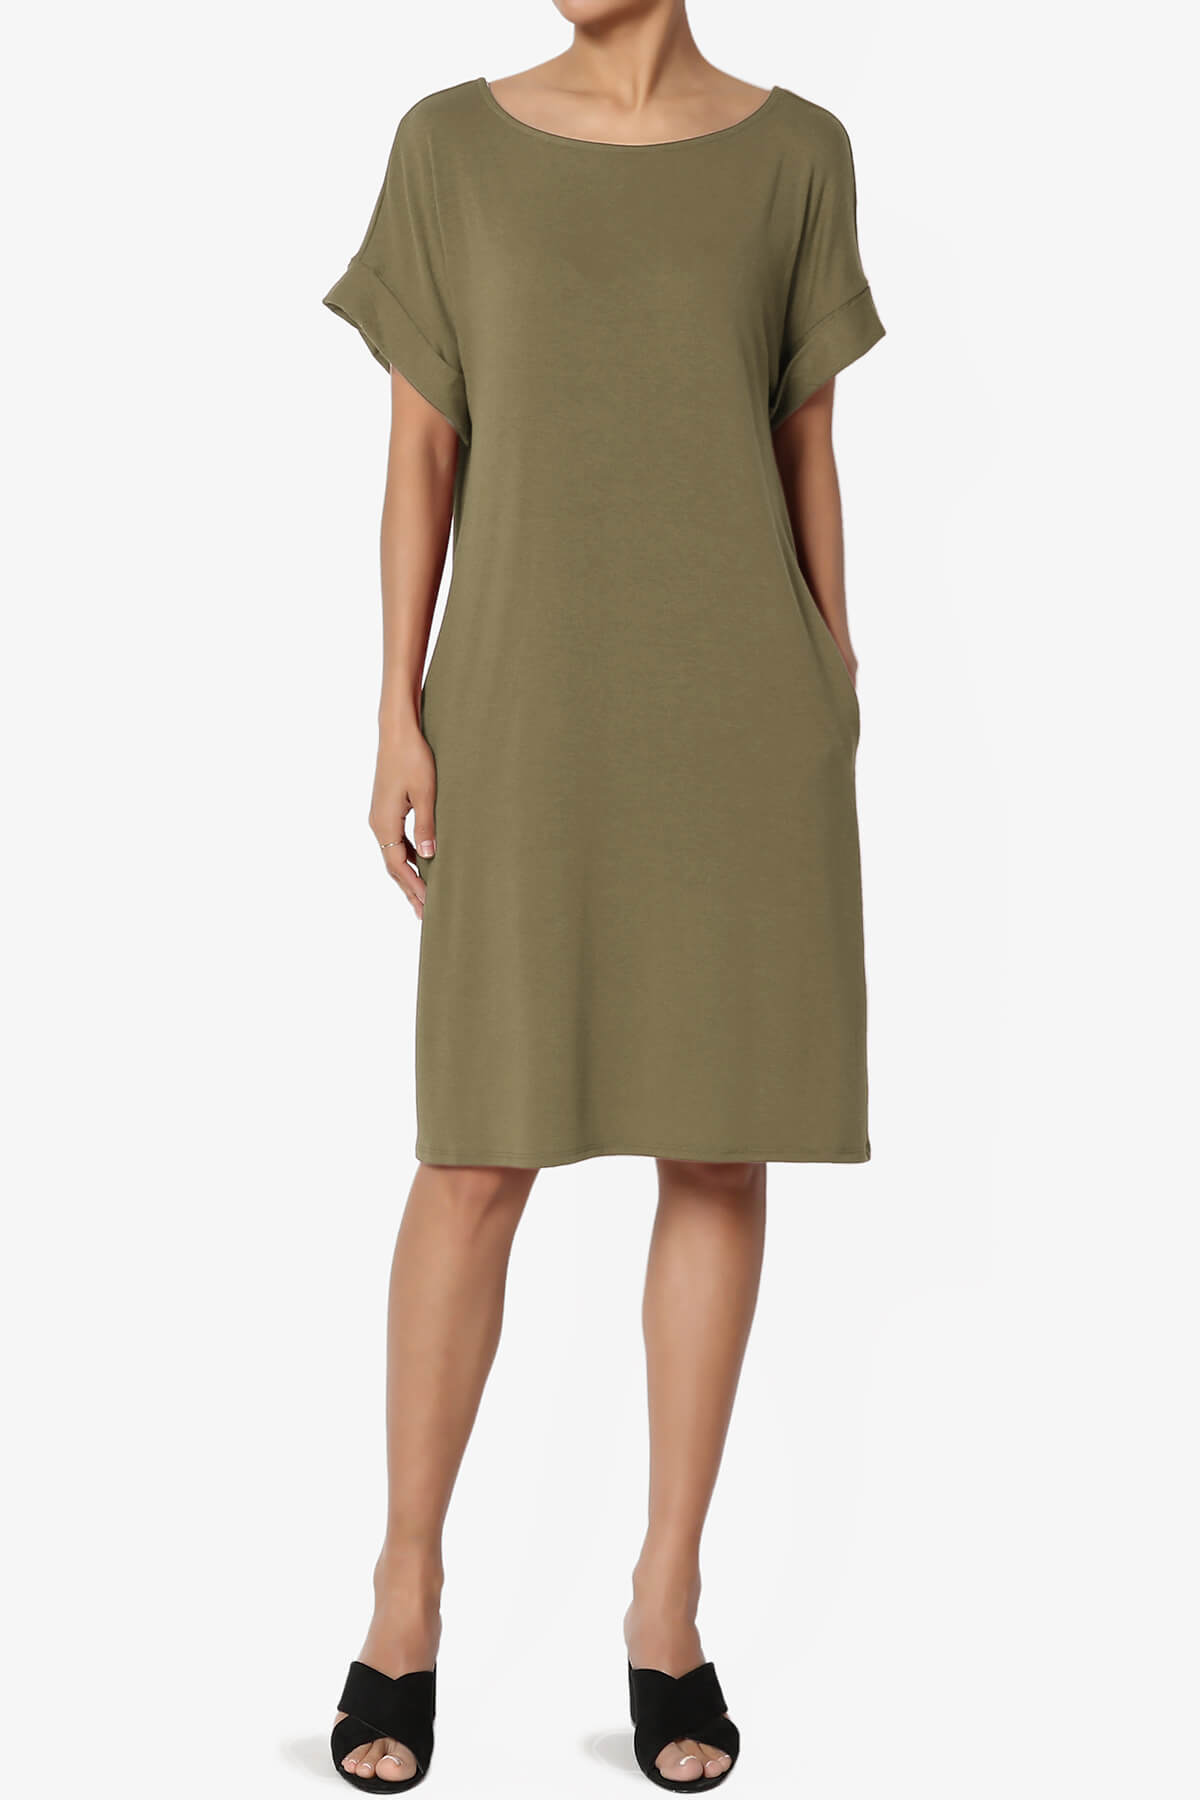 Load image into Gallery viewer, Janie Rolled Short Sleeve Round Neck Dress OLIVE KHAKI_1
